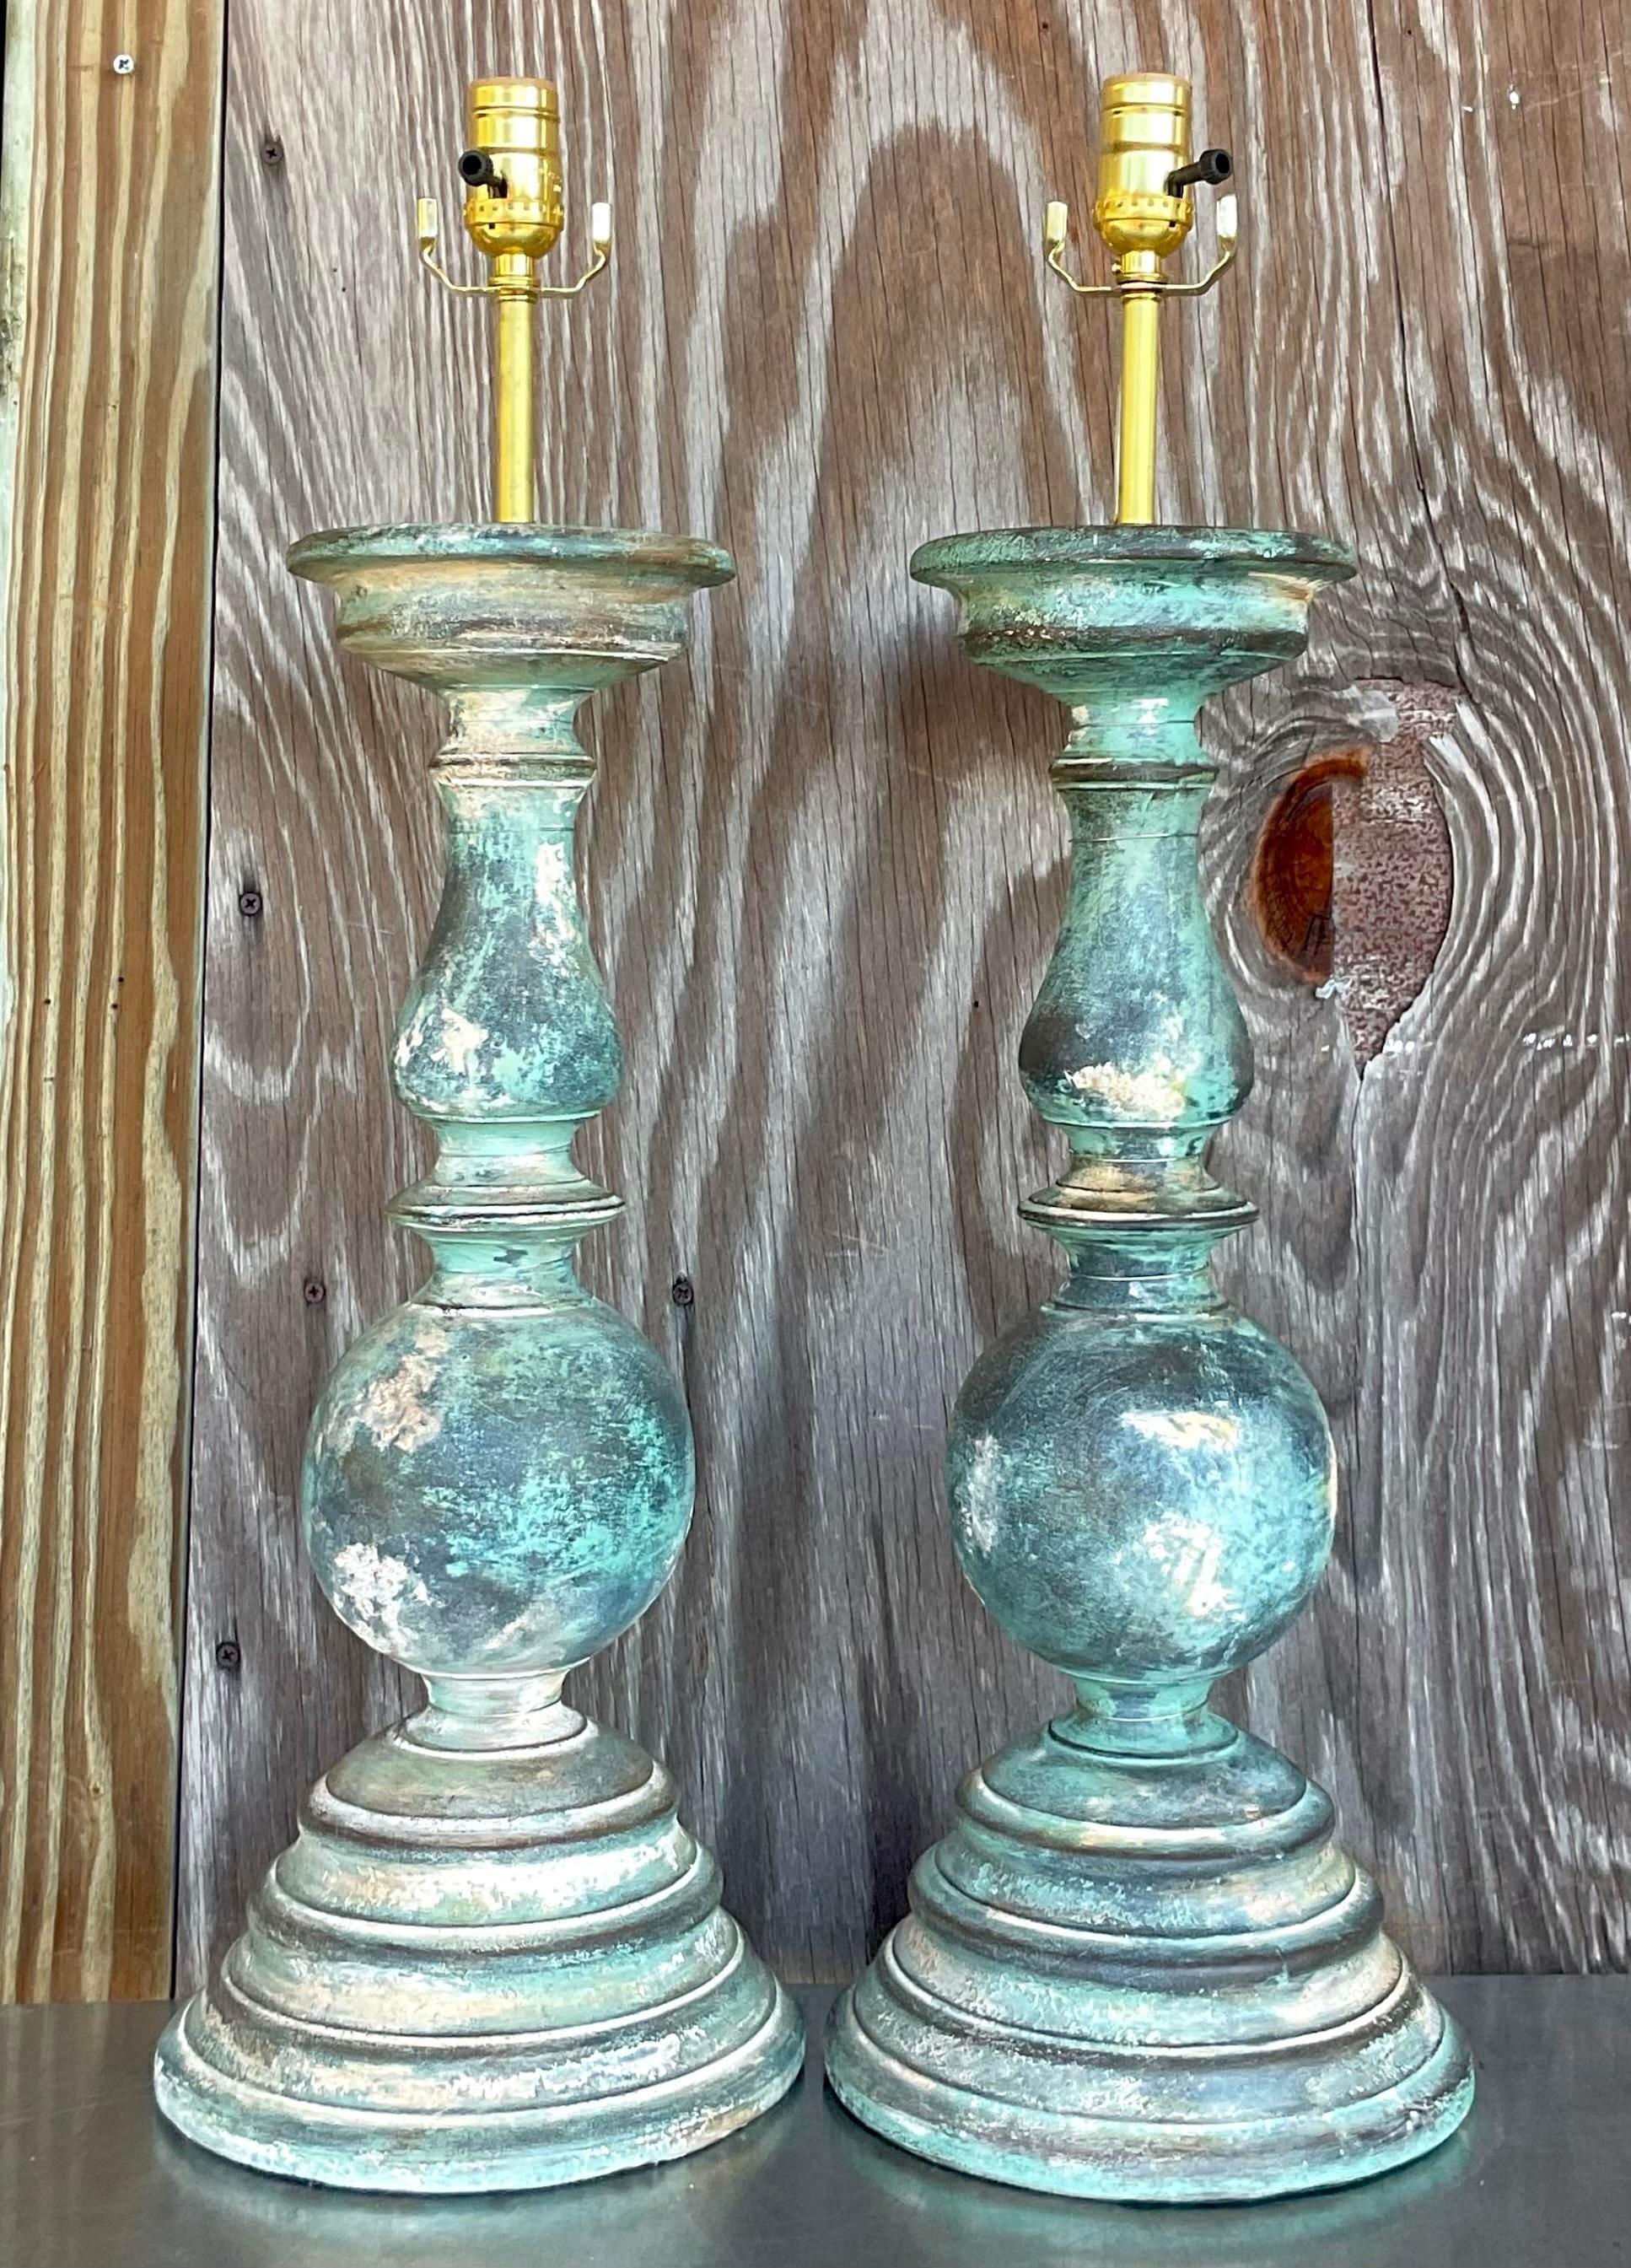 Enhance your home's ambiance with this stunning pair of vintage hand-painted balustrade lamps. Infused with American craftsmanship and charm, each lamp exudes a unique blend of artistic flair and classic elegance. Elevate your decor with these